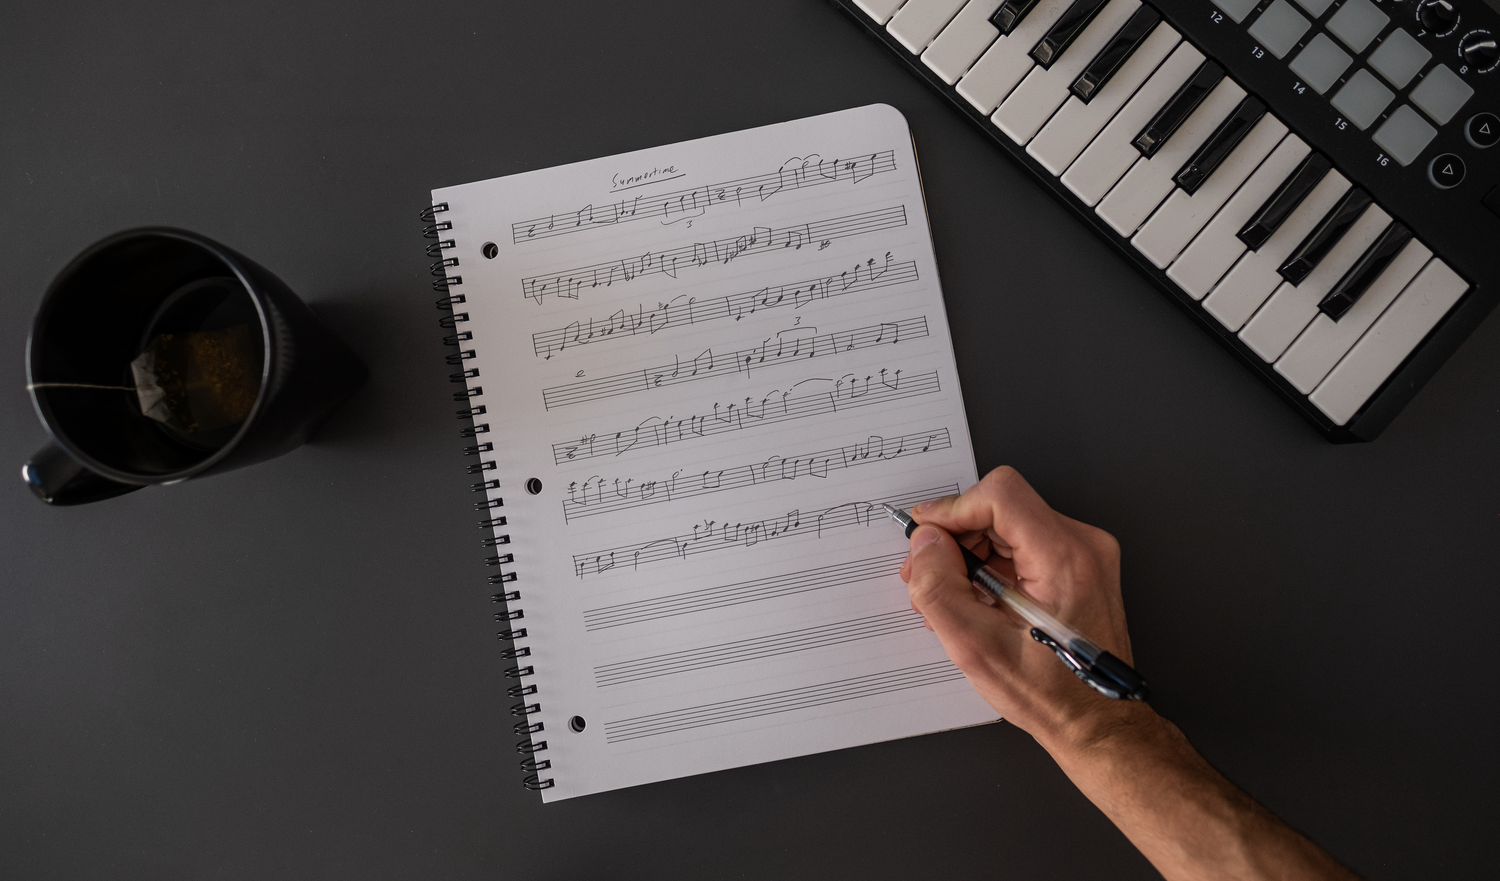 Music composition notebook on gray background alongside keyboard with hand writing 